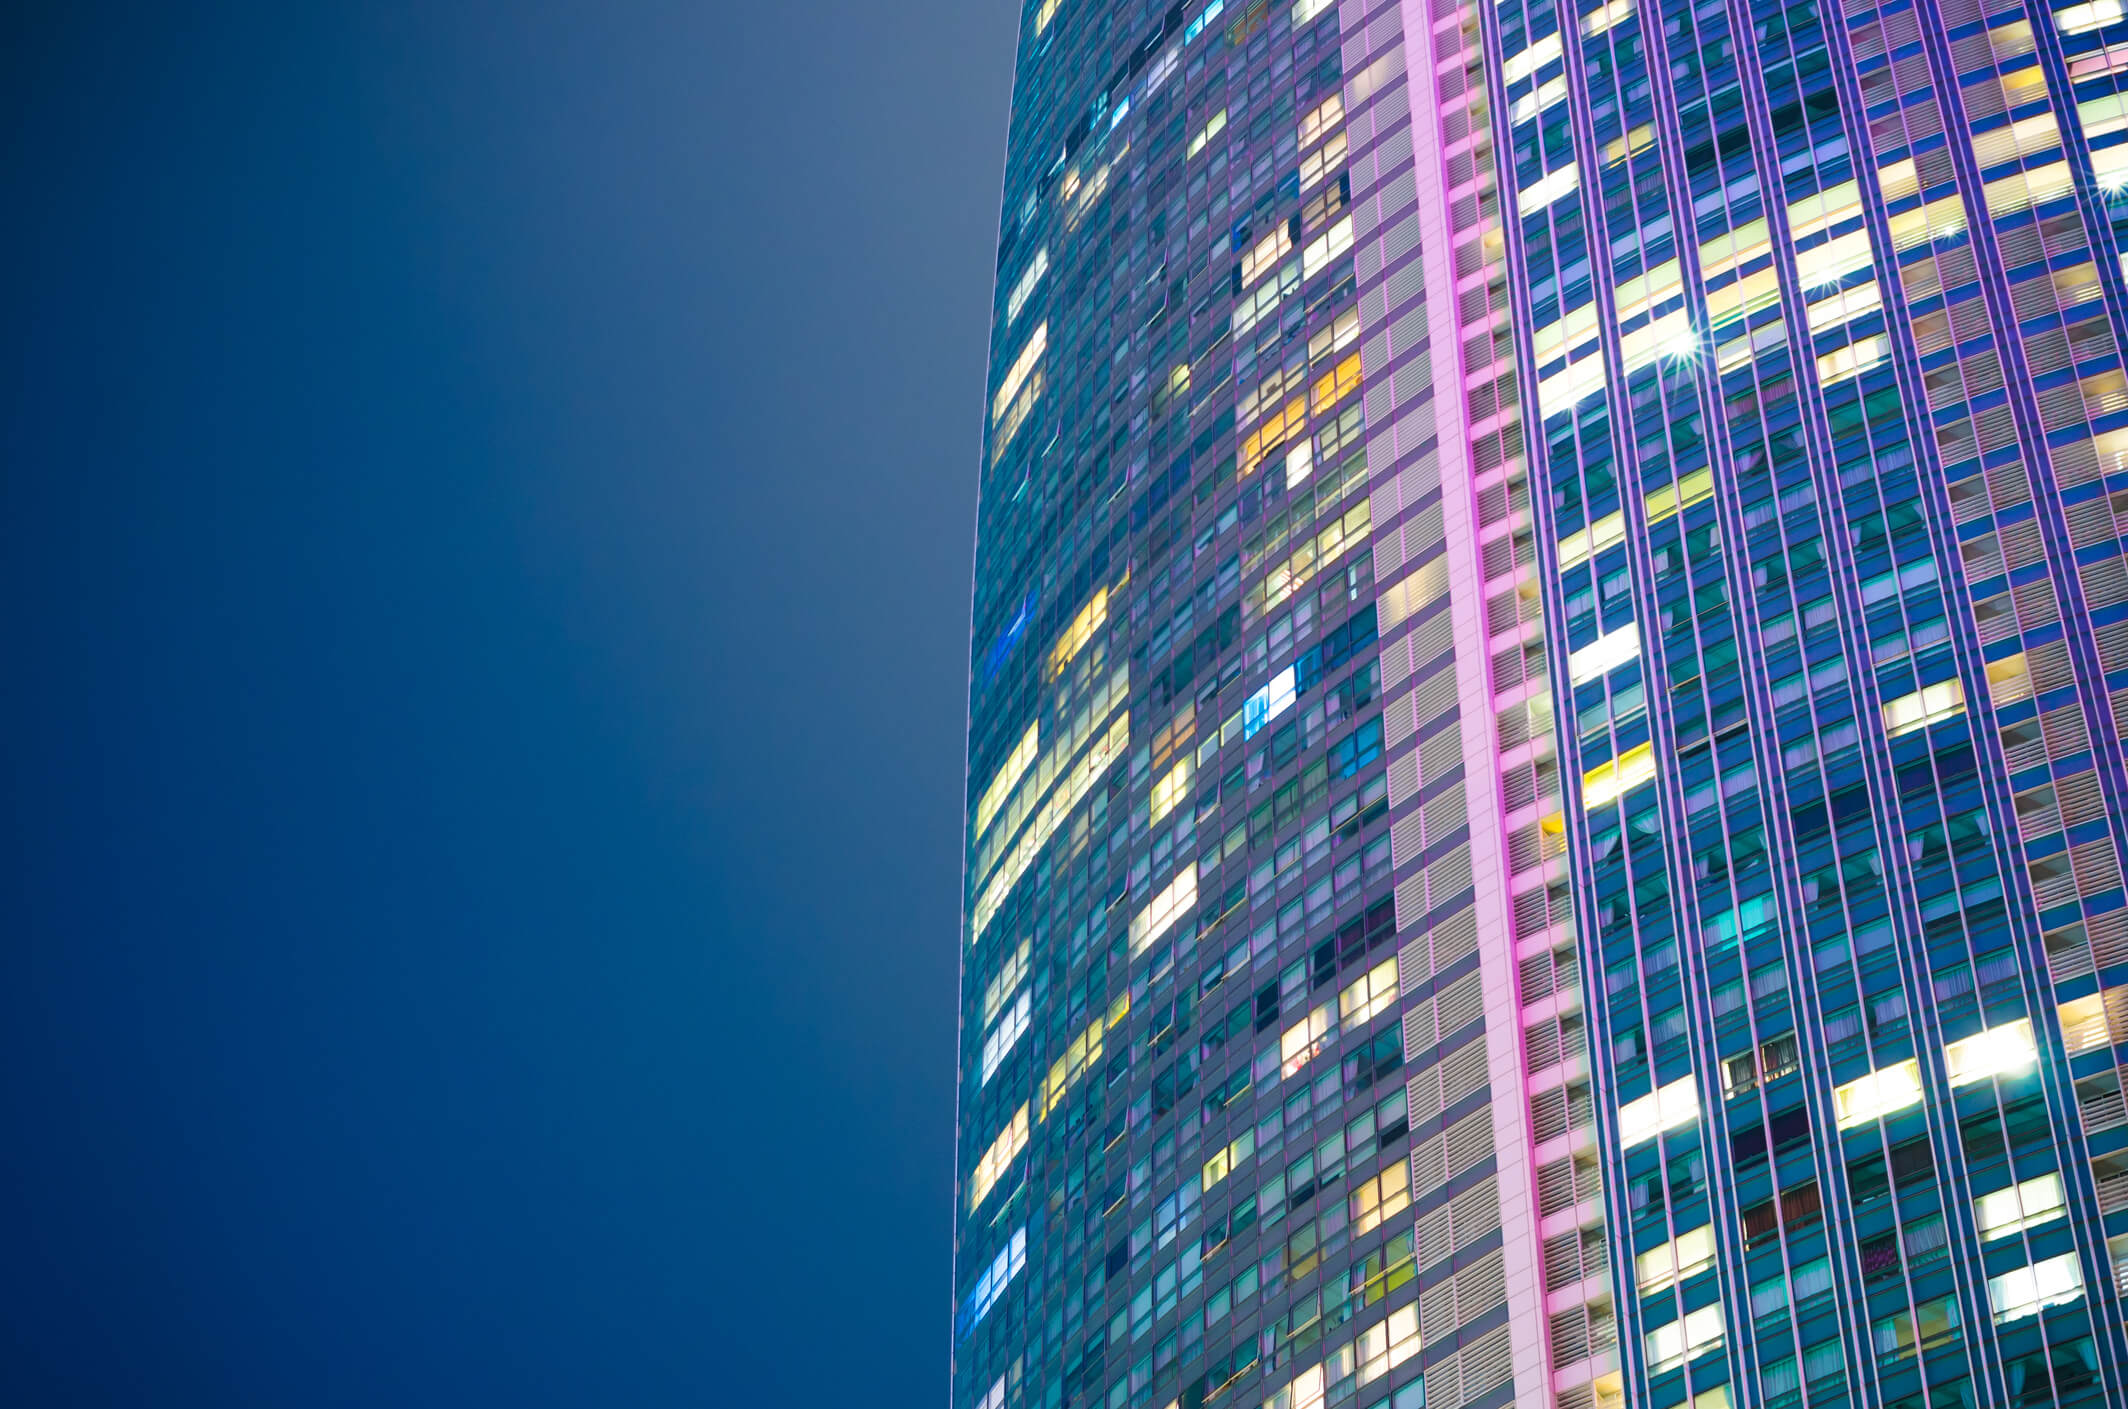 A modern tower block lit up at night